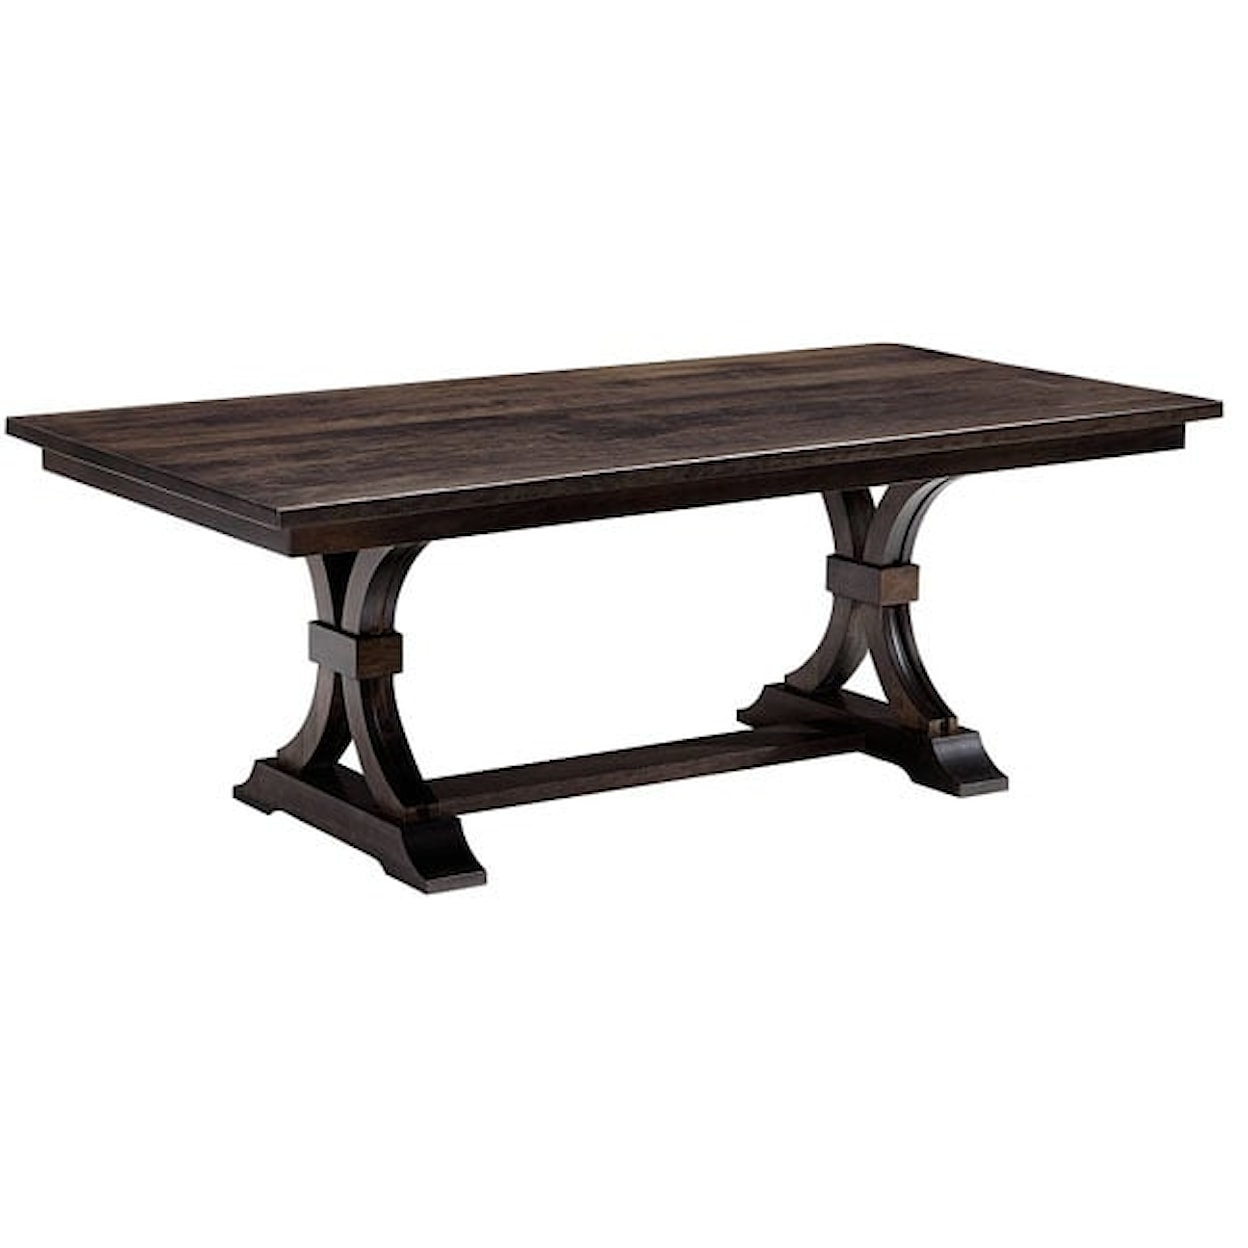 Amish Impressions by Fusion Designs Farmville Trestle Dining Table